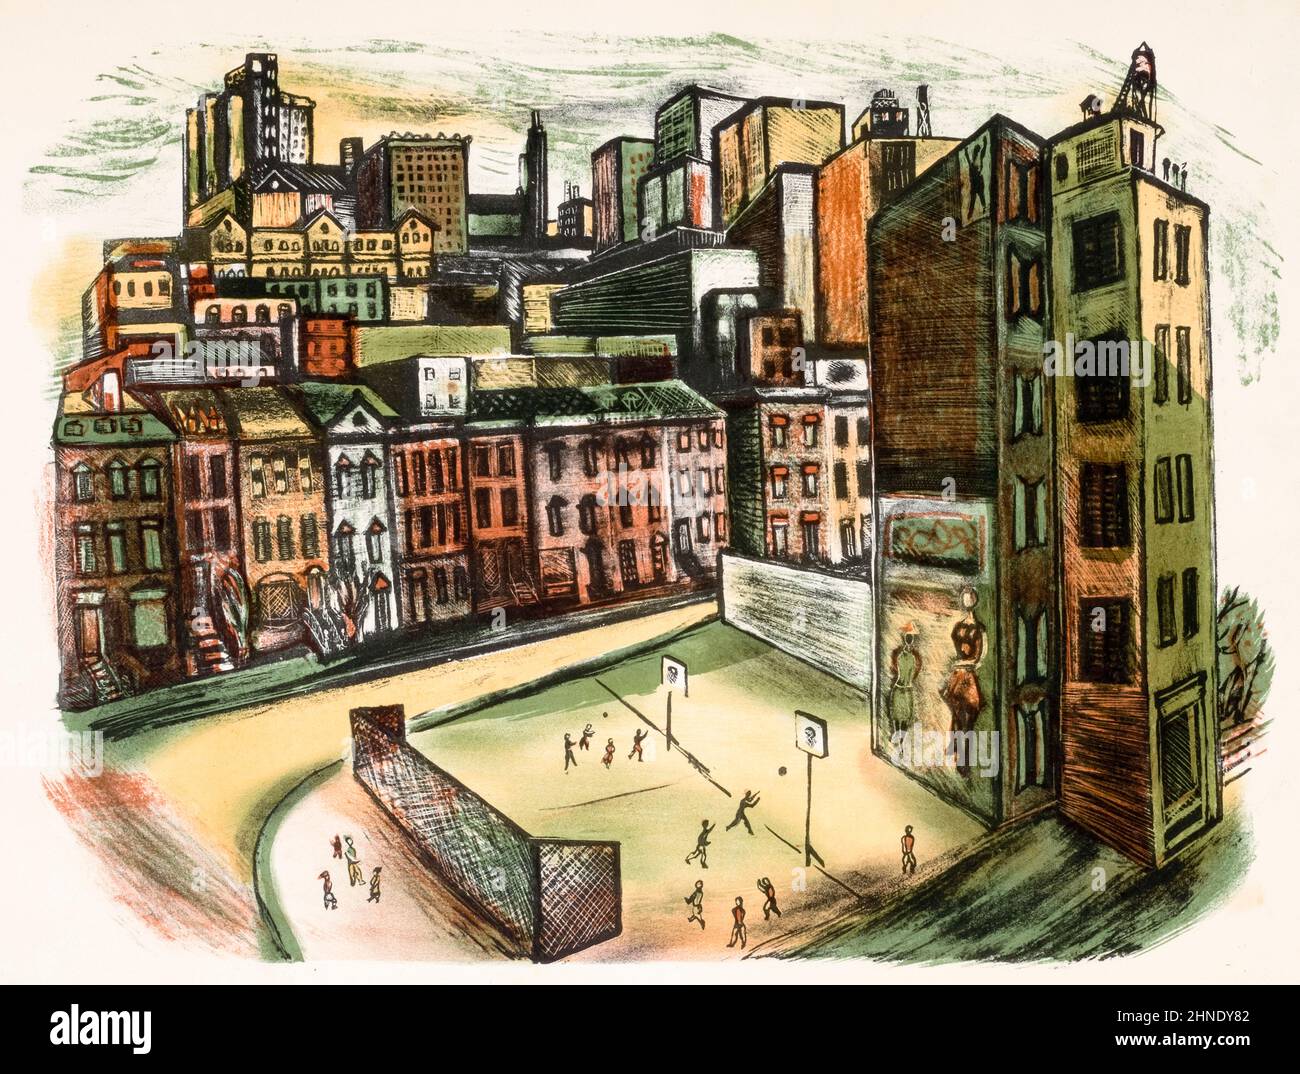 1930s America, City scene with children's playground, (basketball court), New Deal art, lithographic print, 1933-1943 - unidentified artist Stock Photo